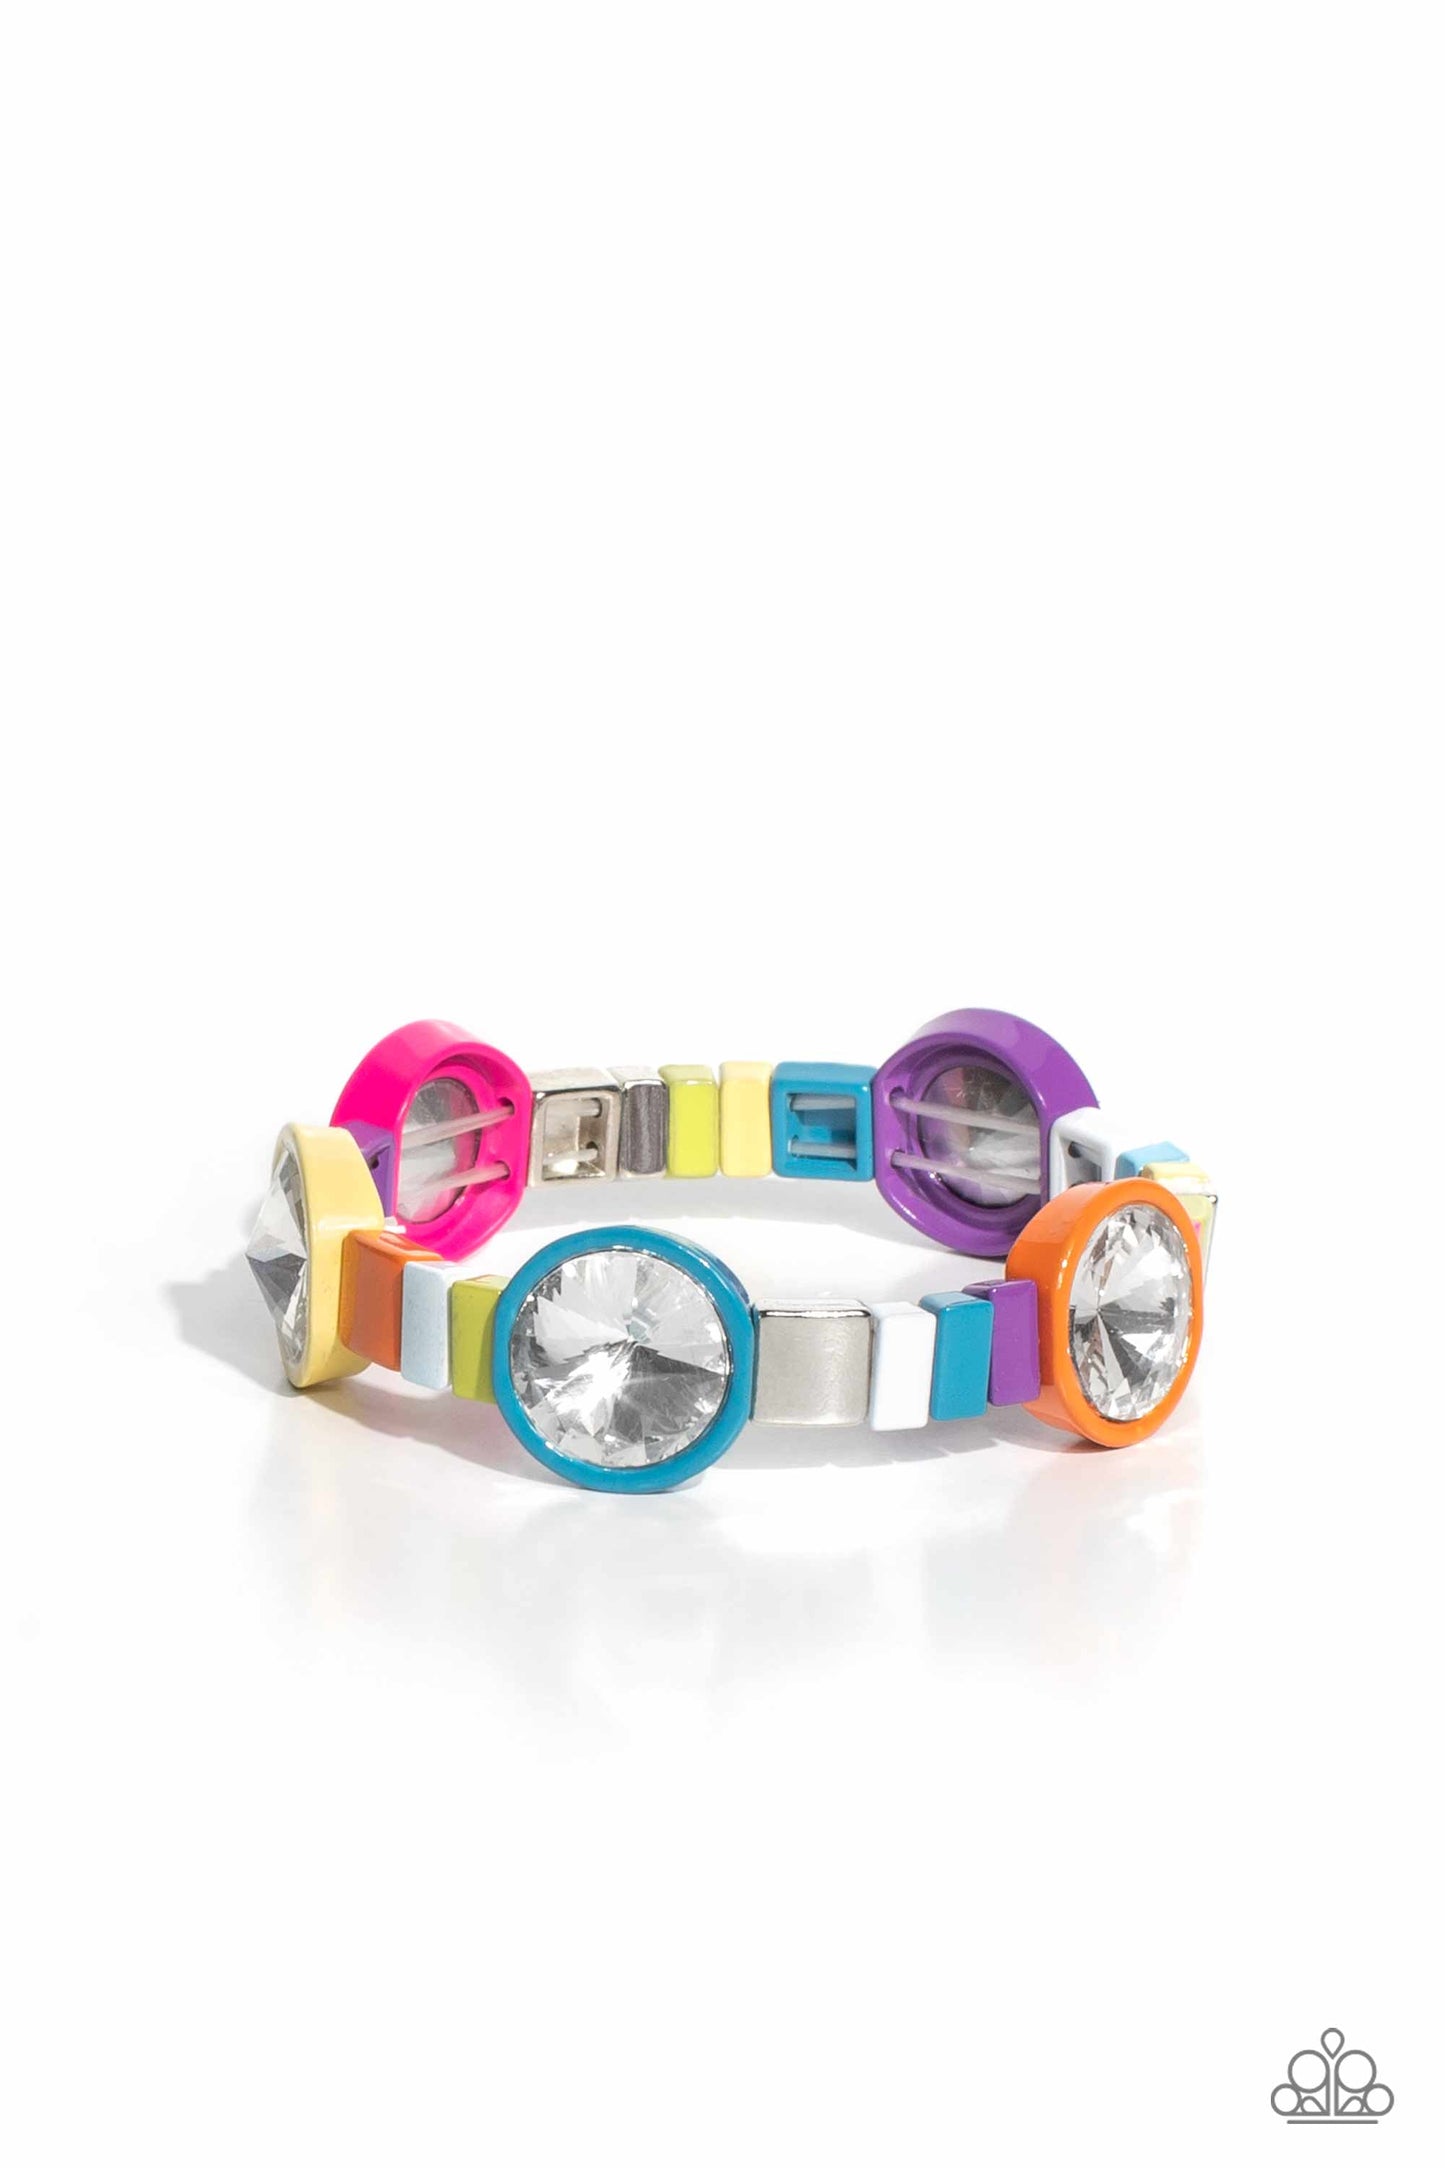 Multicolored Madness - Multi Color Bracelet - Paparazzi Accessories - A colorful display, concaved circular frames in orange, yellow, purple, Pink Peacock, and blue shades feature white gems for a touch of sparkle bracelet.